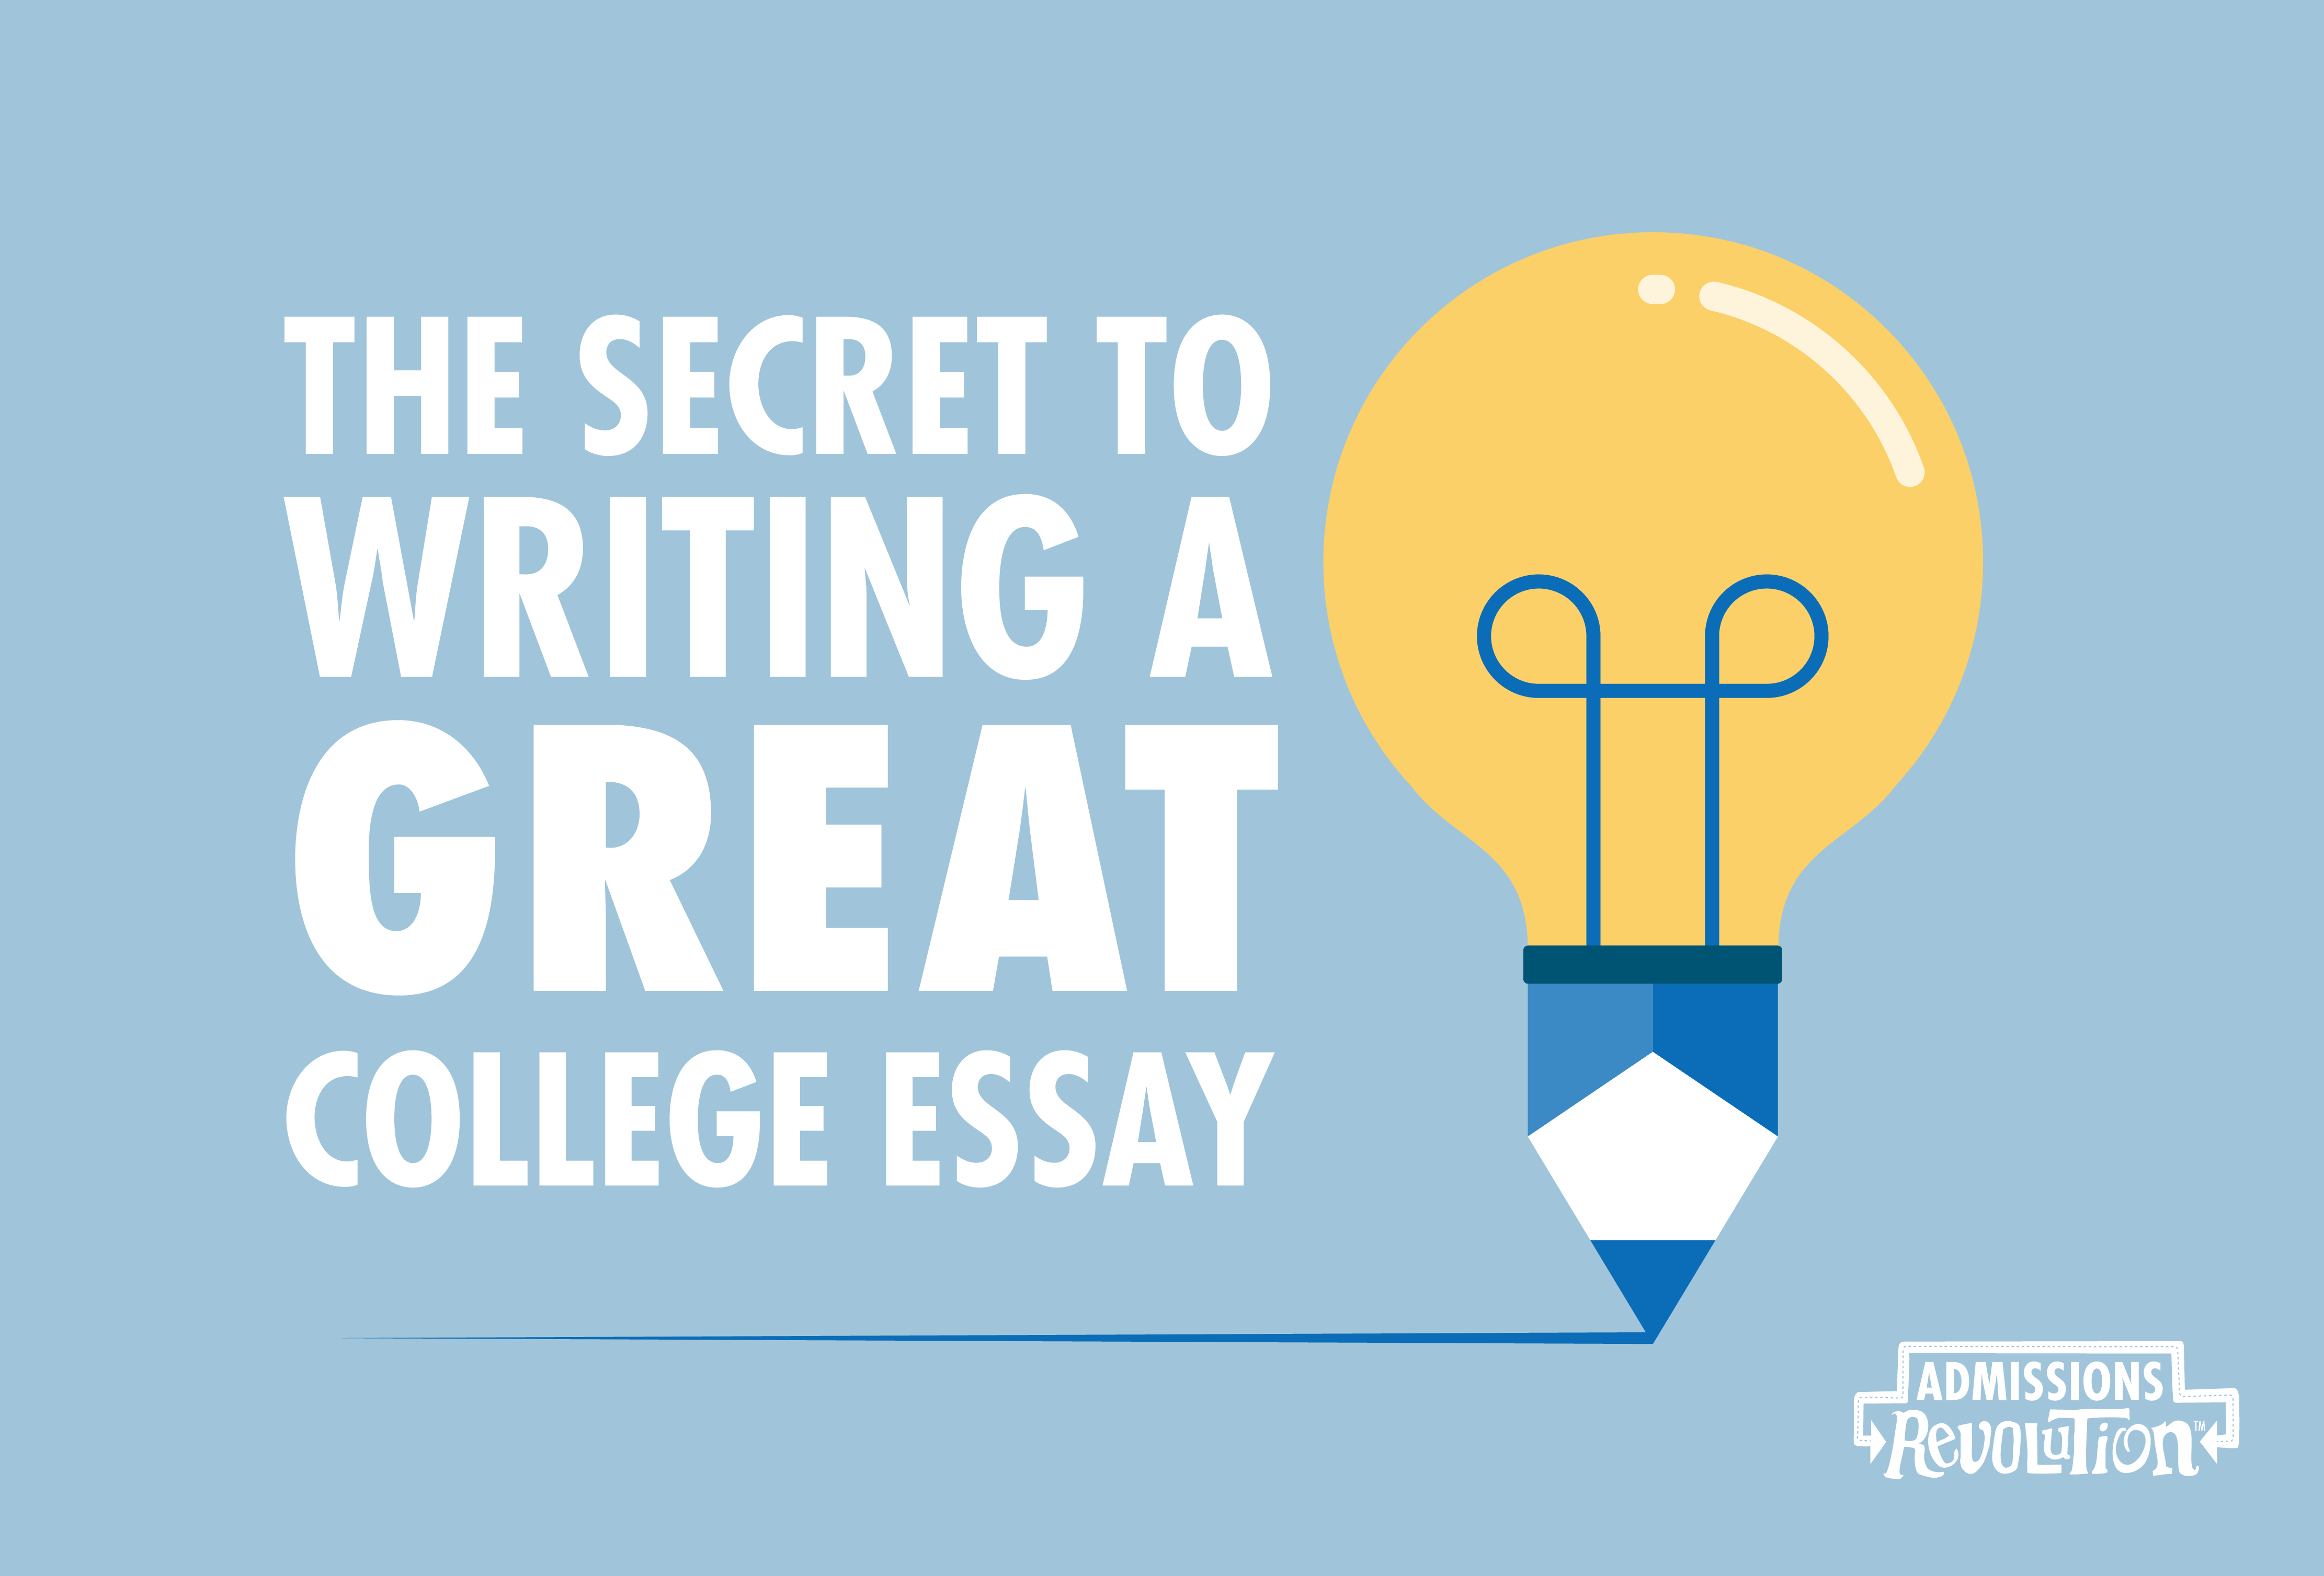 Do you know the secret to writing a great college essay?